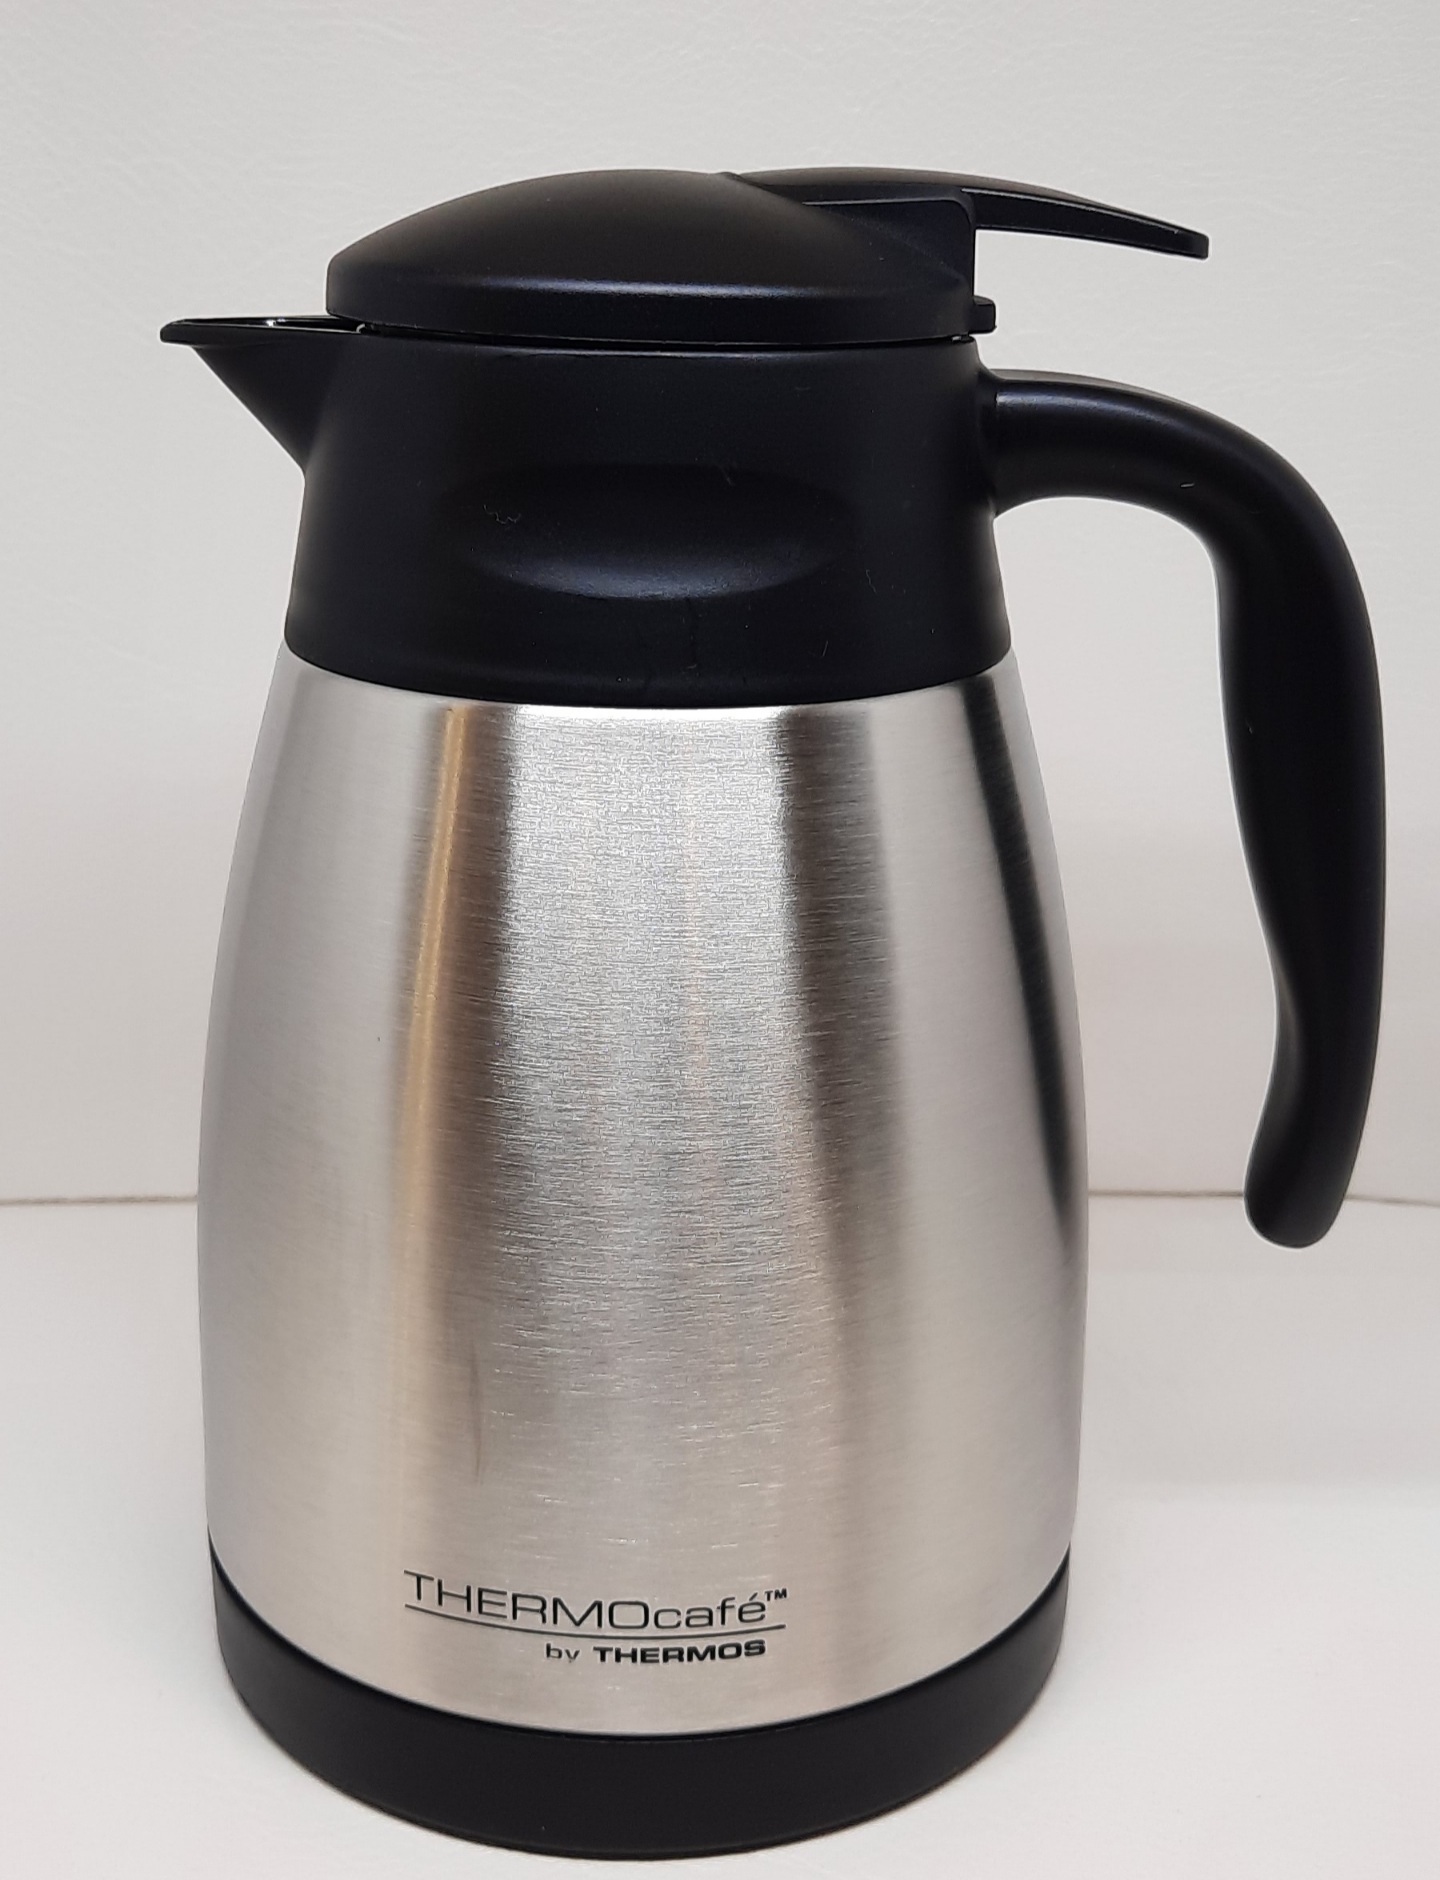 Isolierkanne Thermo Cafe Edelstahl 1 Liter doppelwandig,Thermos 